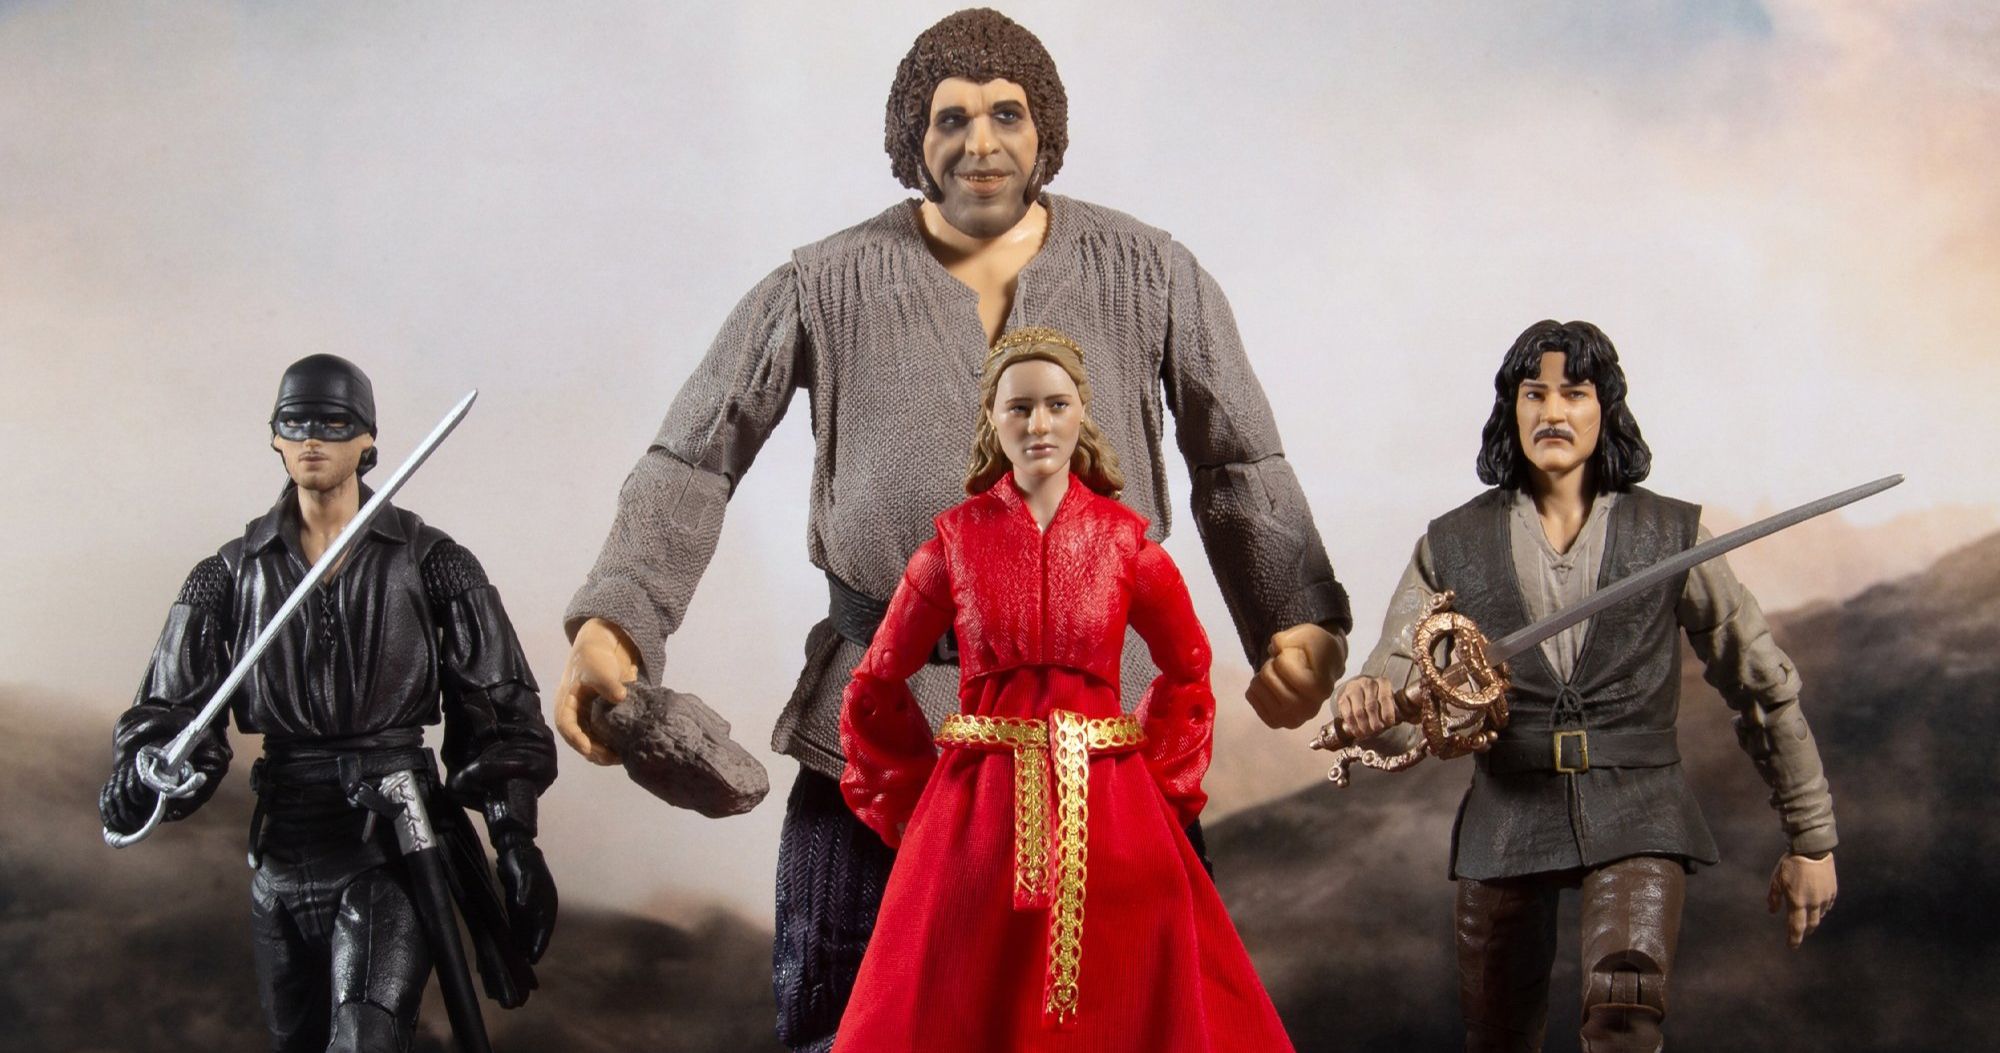 The Princess Bride Action Figures Unveiled by McFarlane Toys